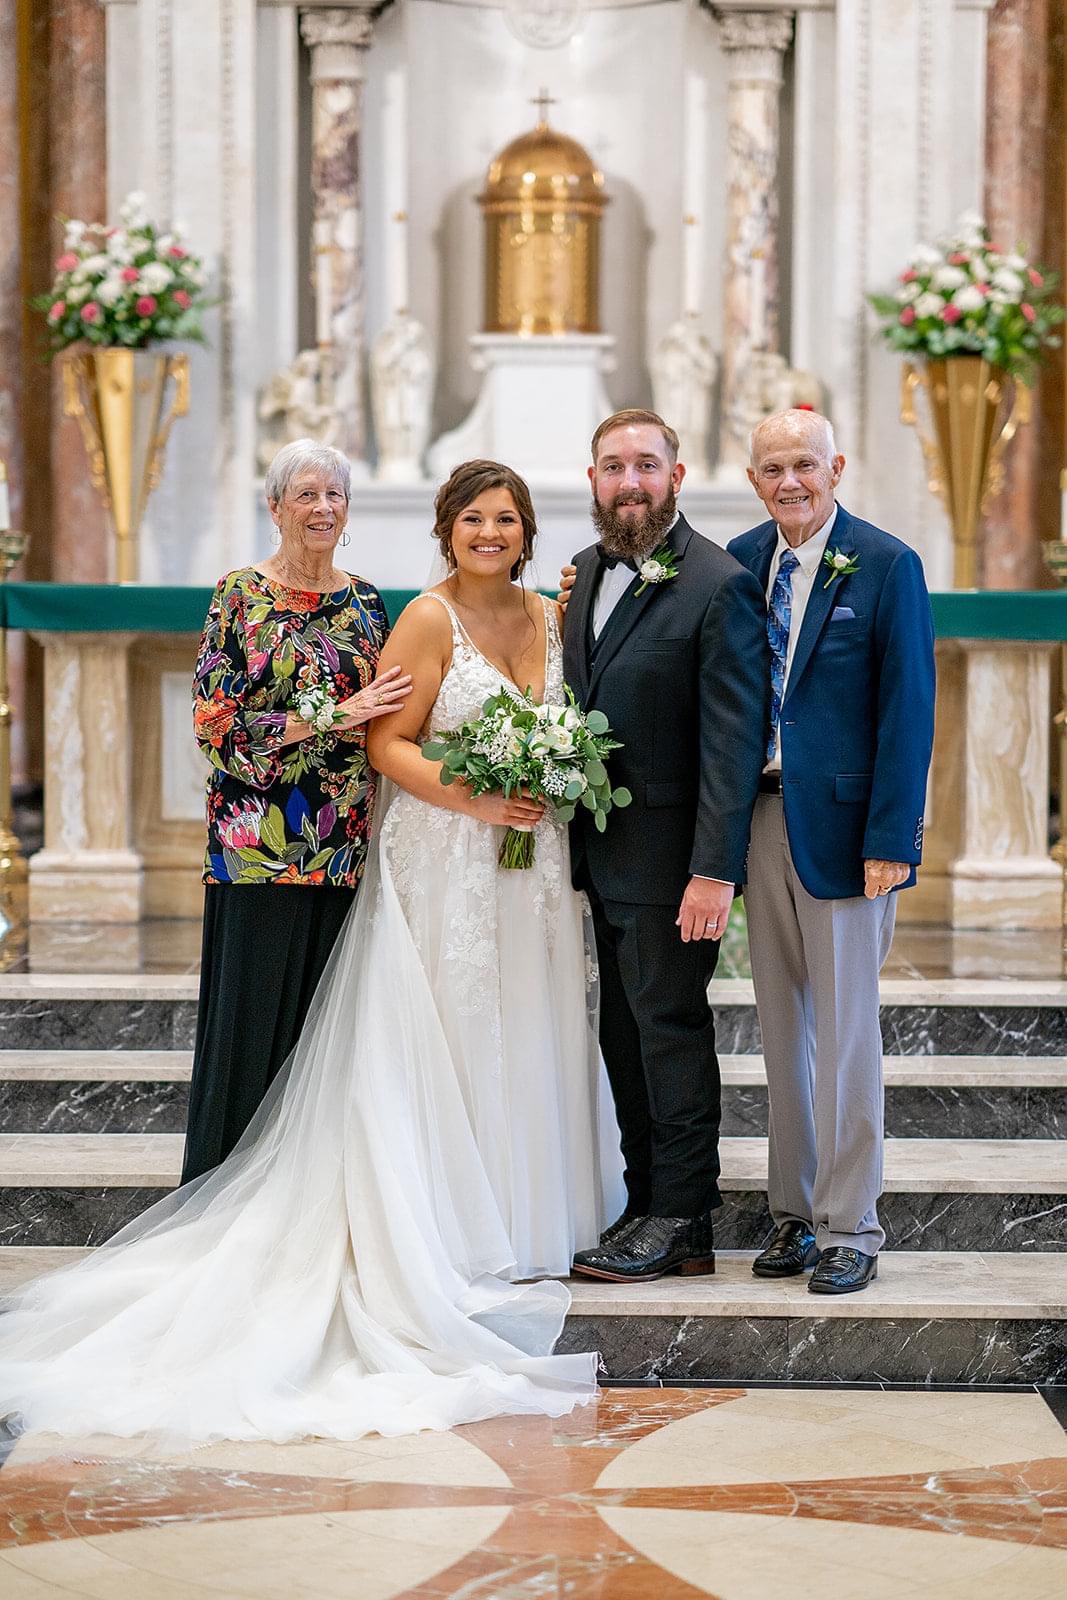 Grandma and Grandpa with the Newly Wed Hathaways. We are so thankful to have had the memories of grandpa at our wedding. It meant the world to us to have him as a reader at our wedding in July 2021.